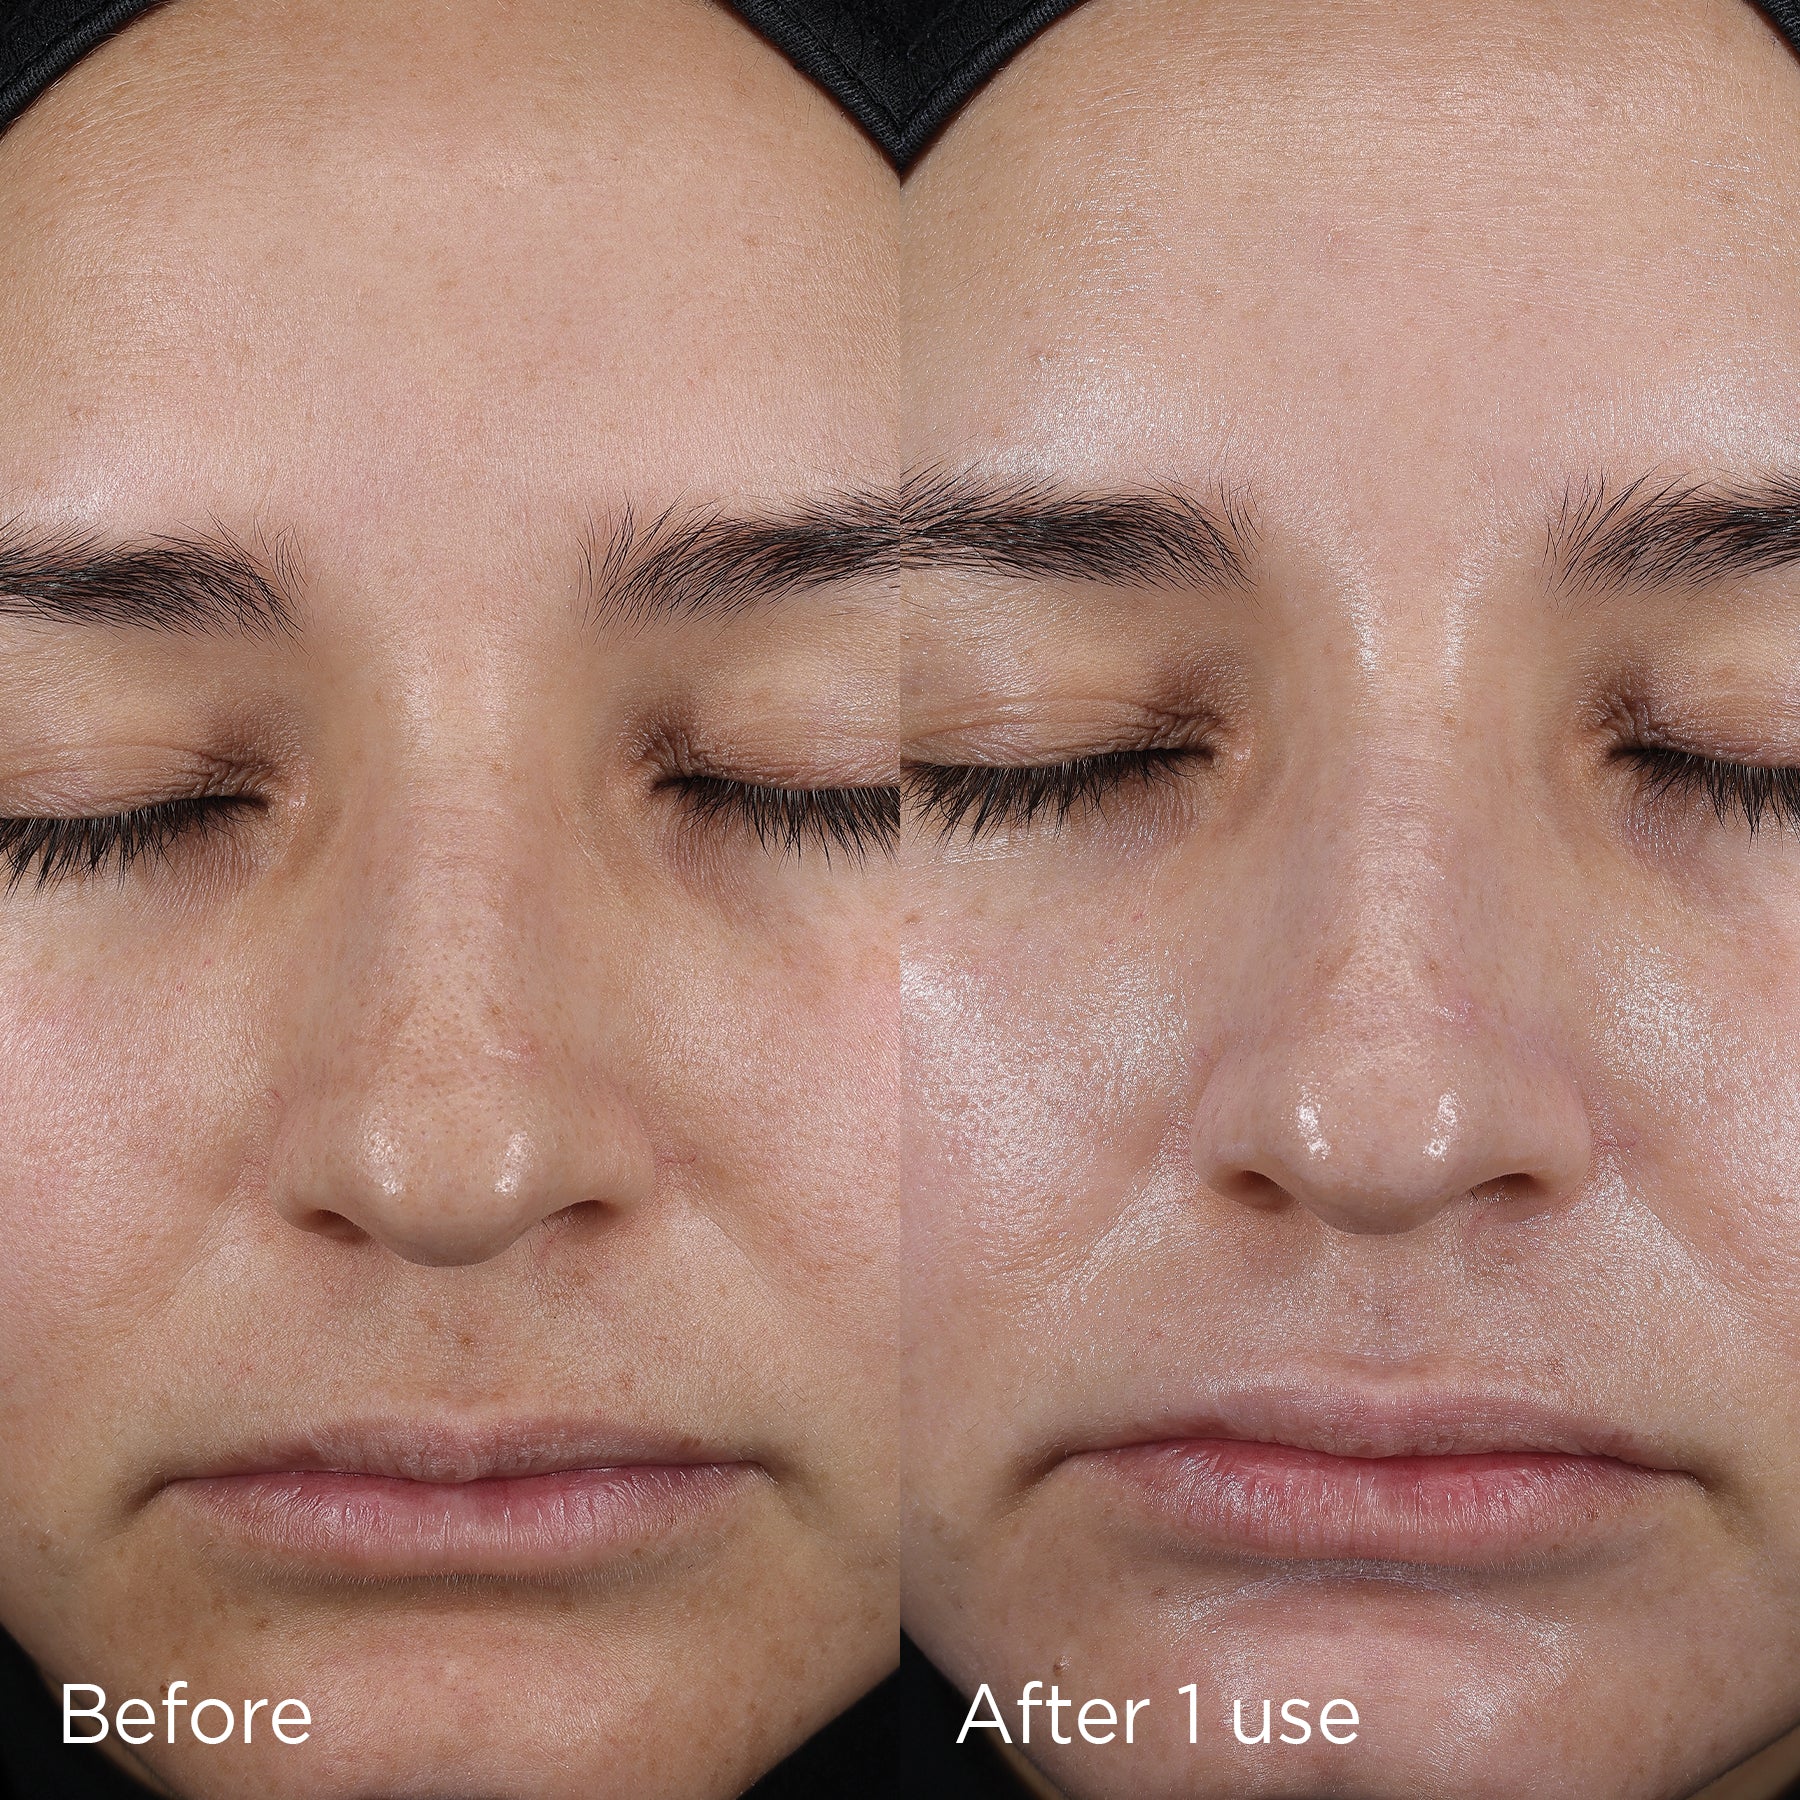 Before and after photos of a woman's face showing benefits of using DAILY PREVENTION pure mineral hydrating face moisturizer with sunscreen